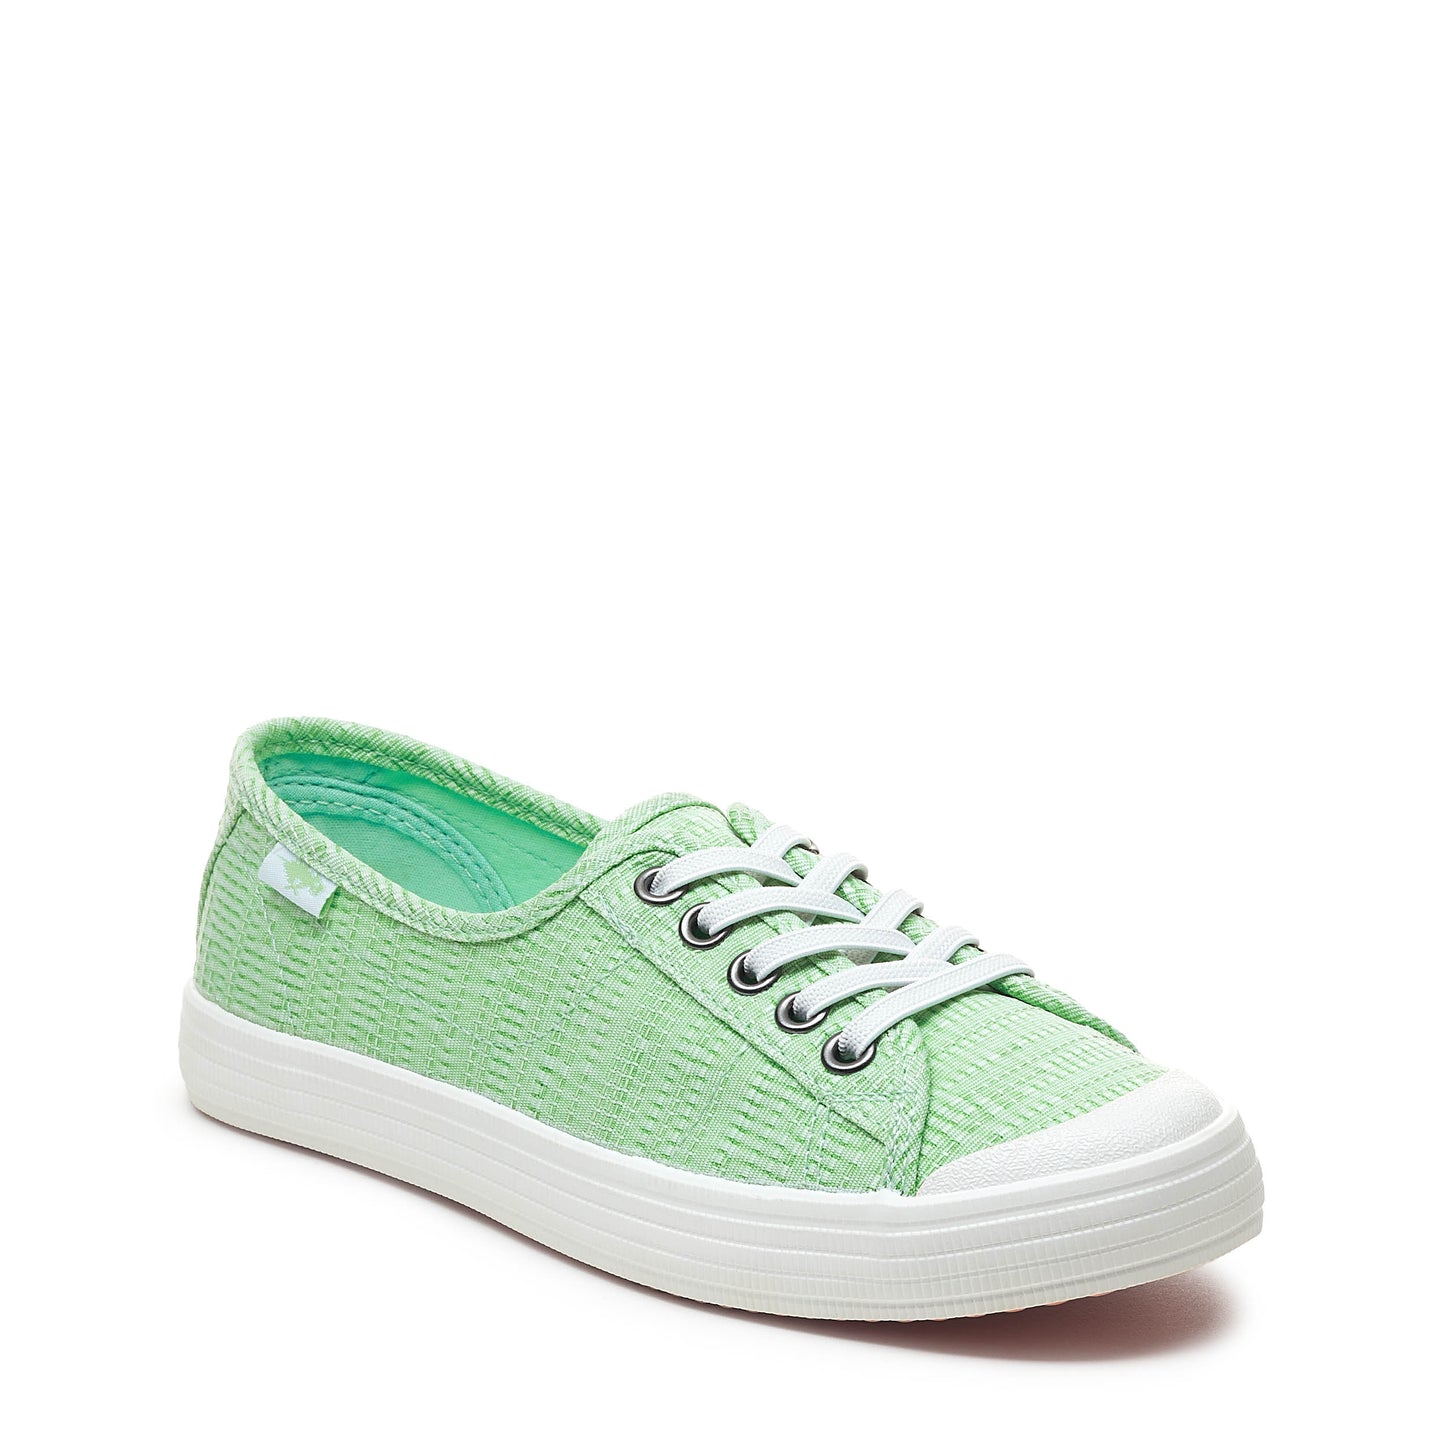 Chow Chow Mint Green Trainers